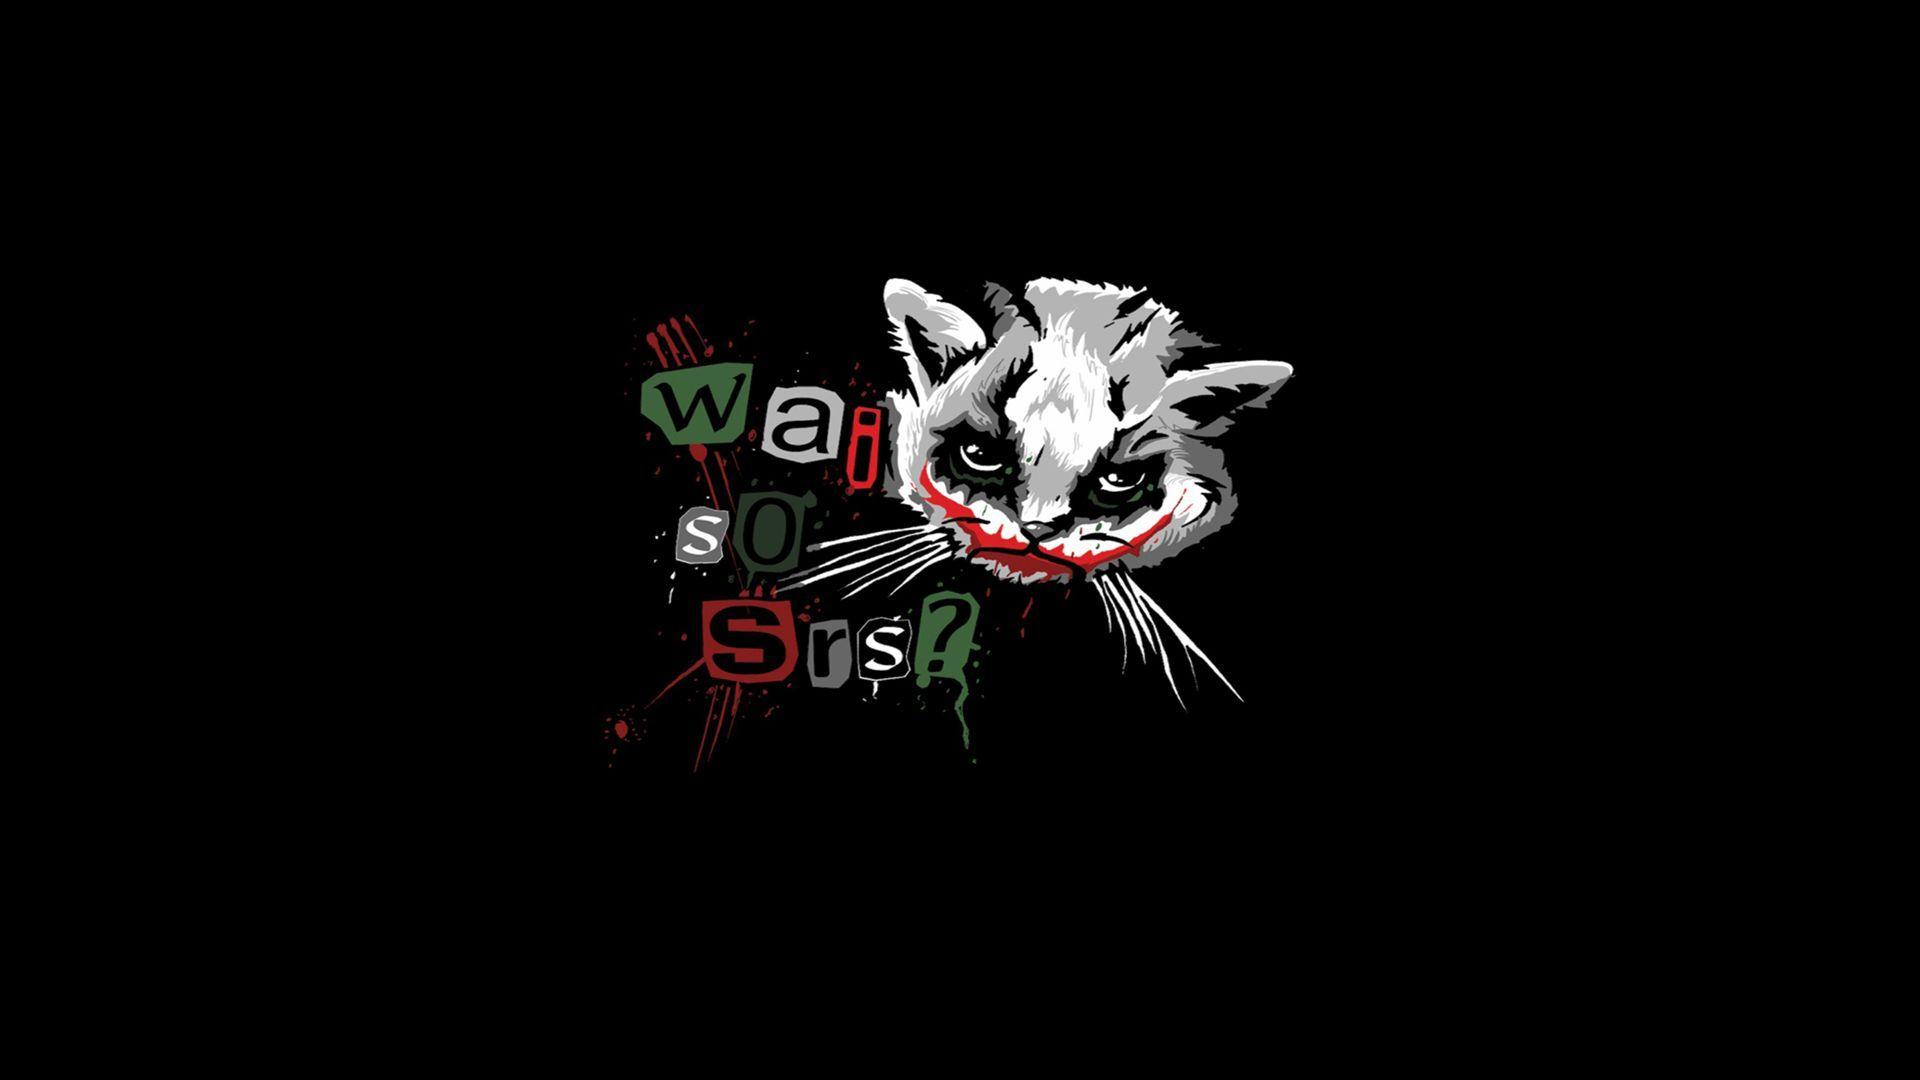 Joker Why So Serious Wallpapers Free Download 1920x1080PX